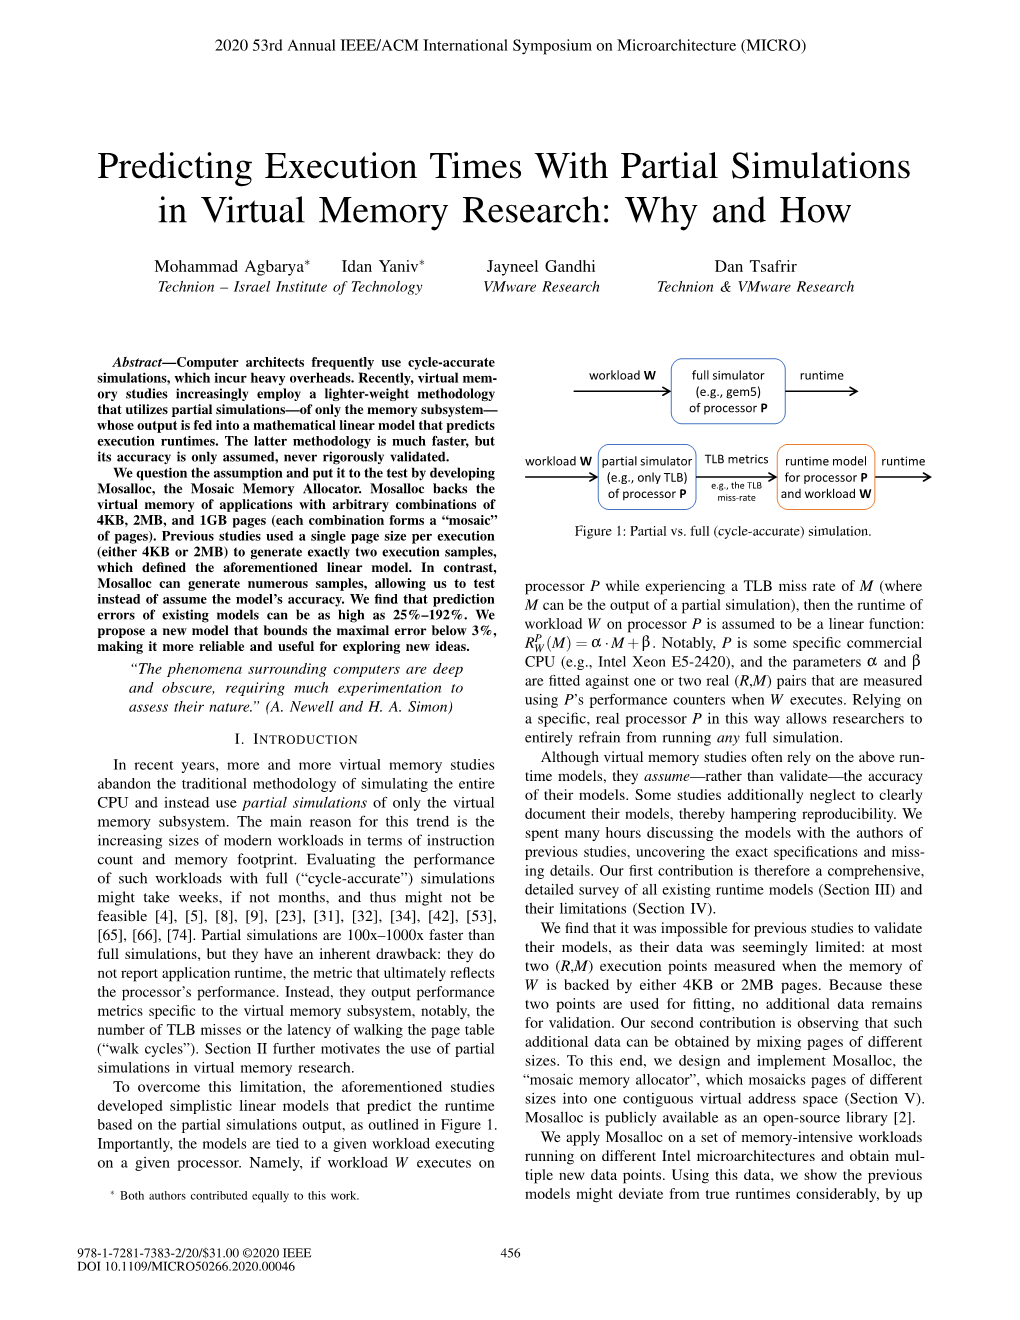 Predicting Execution Times with Partial Simulations in Virtual Memory Research: Why and How